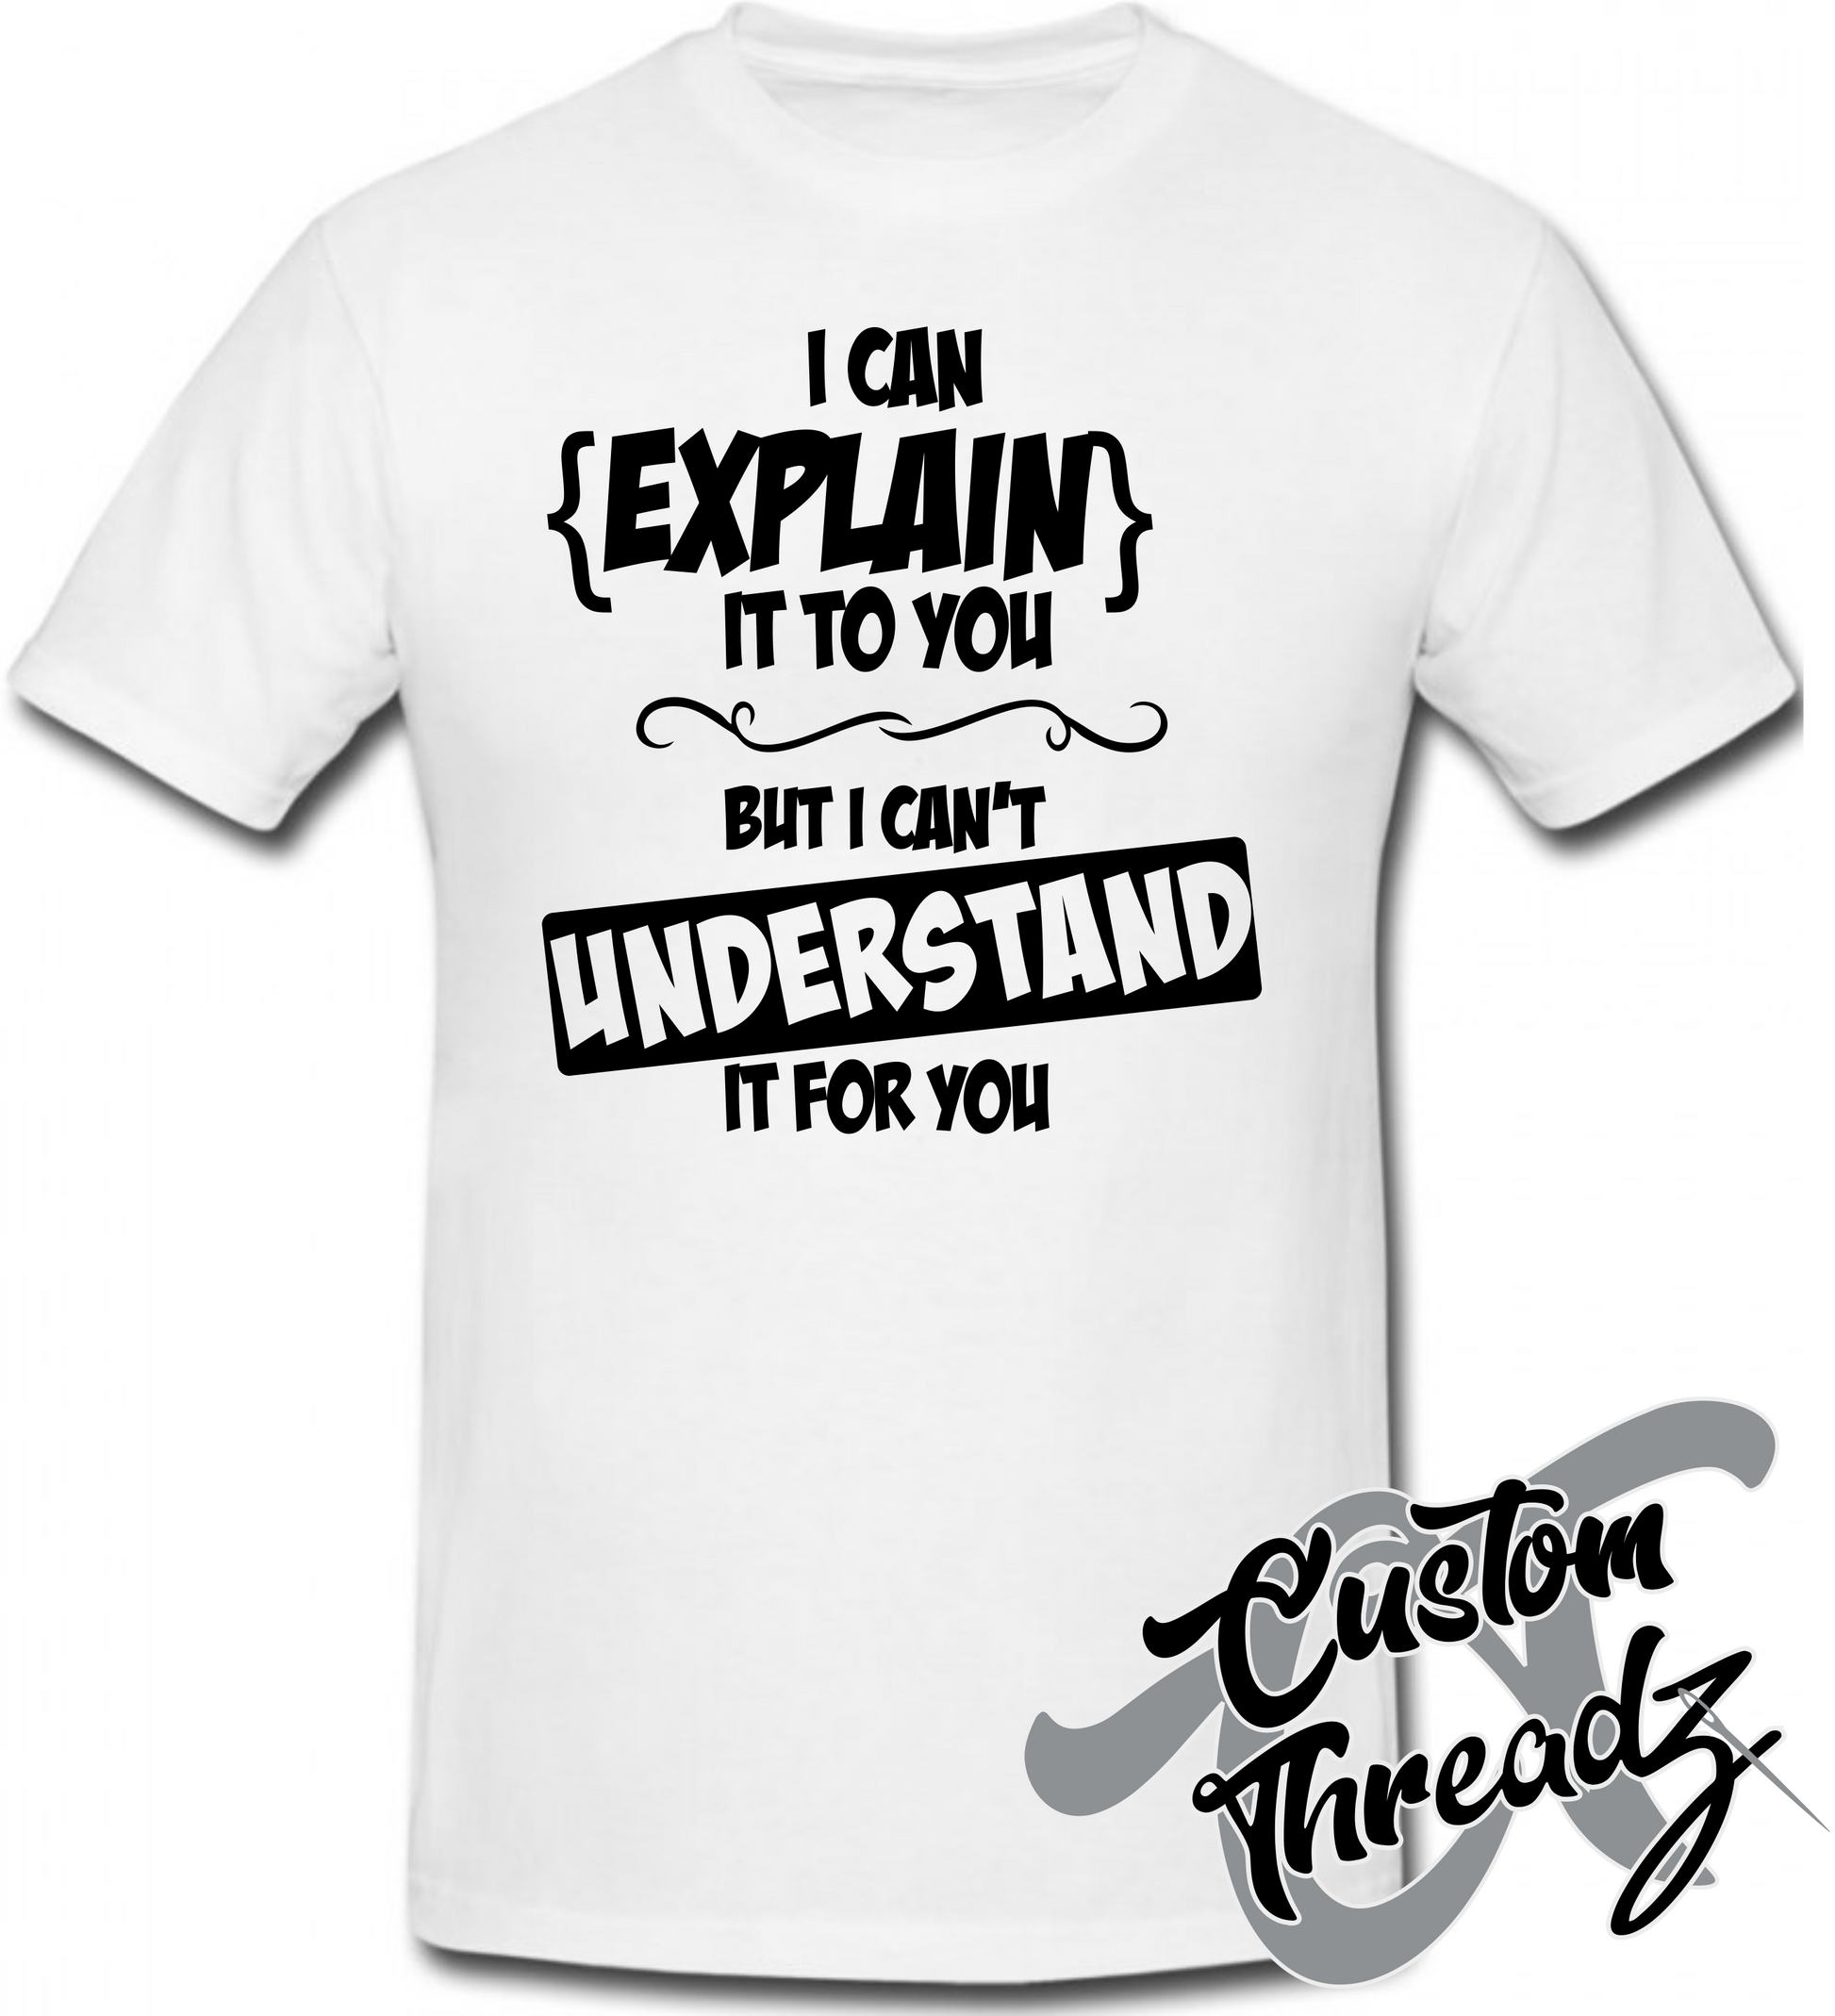 white tee with can explain cant understand DTG printed design